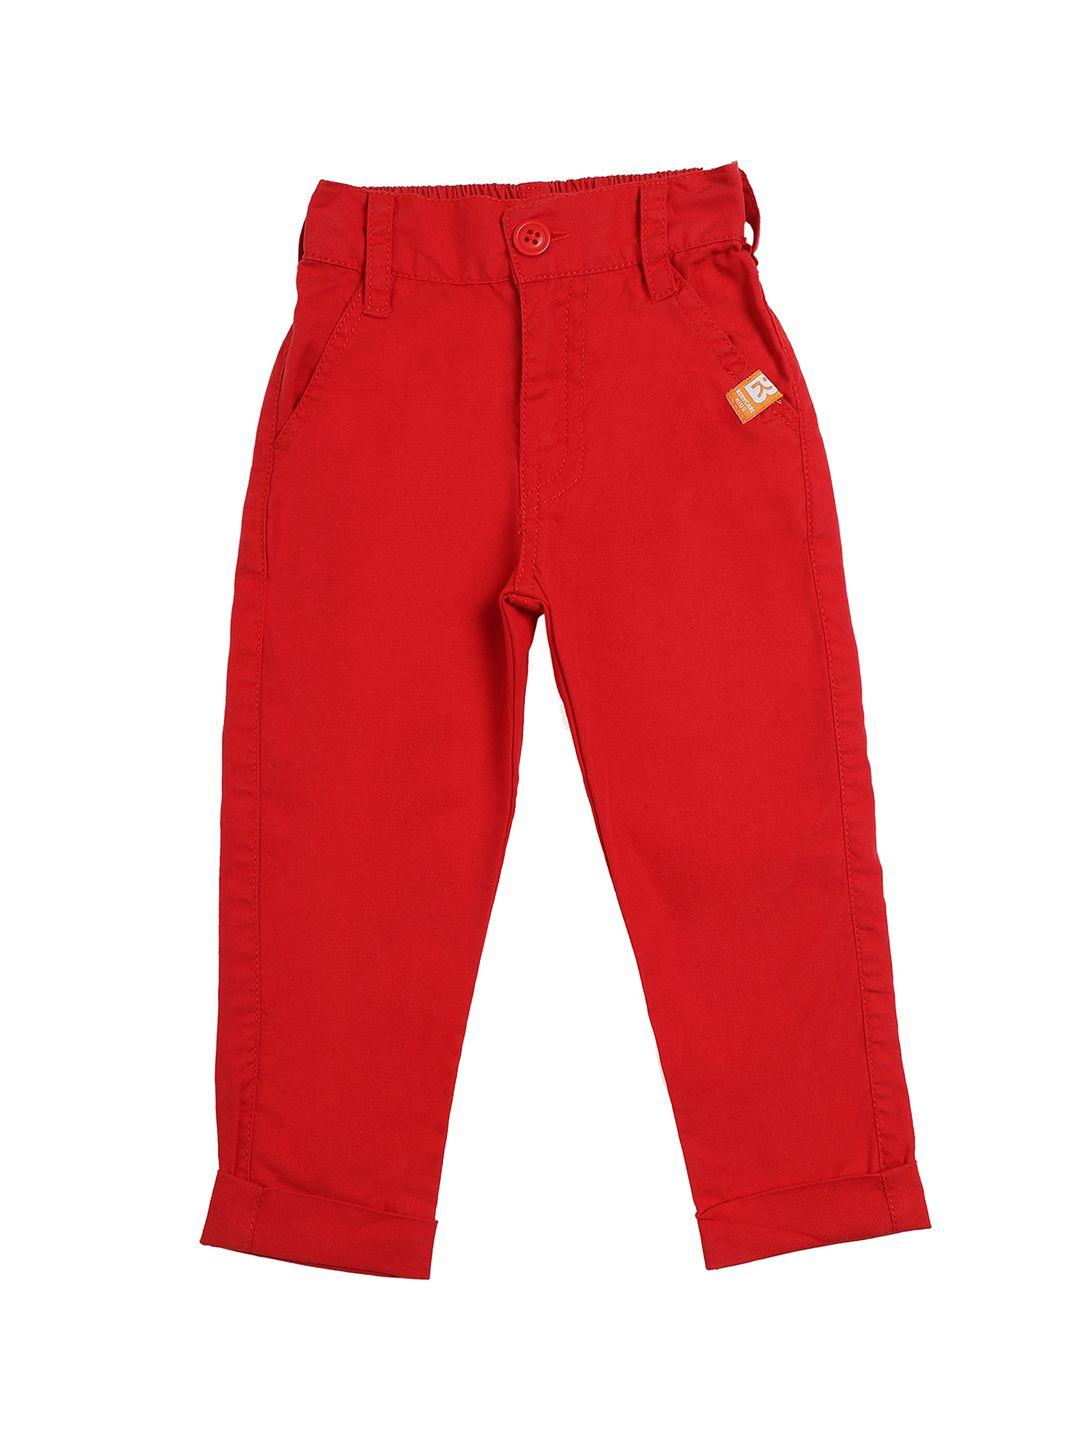 bodycare kids boys red solid lounge pants